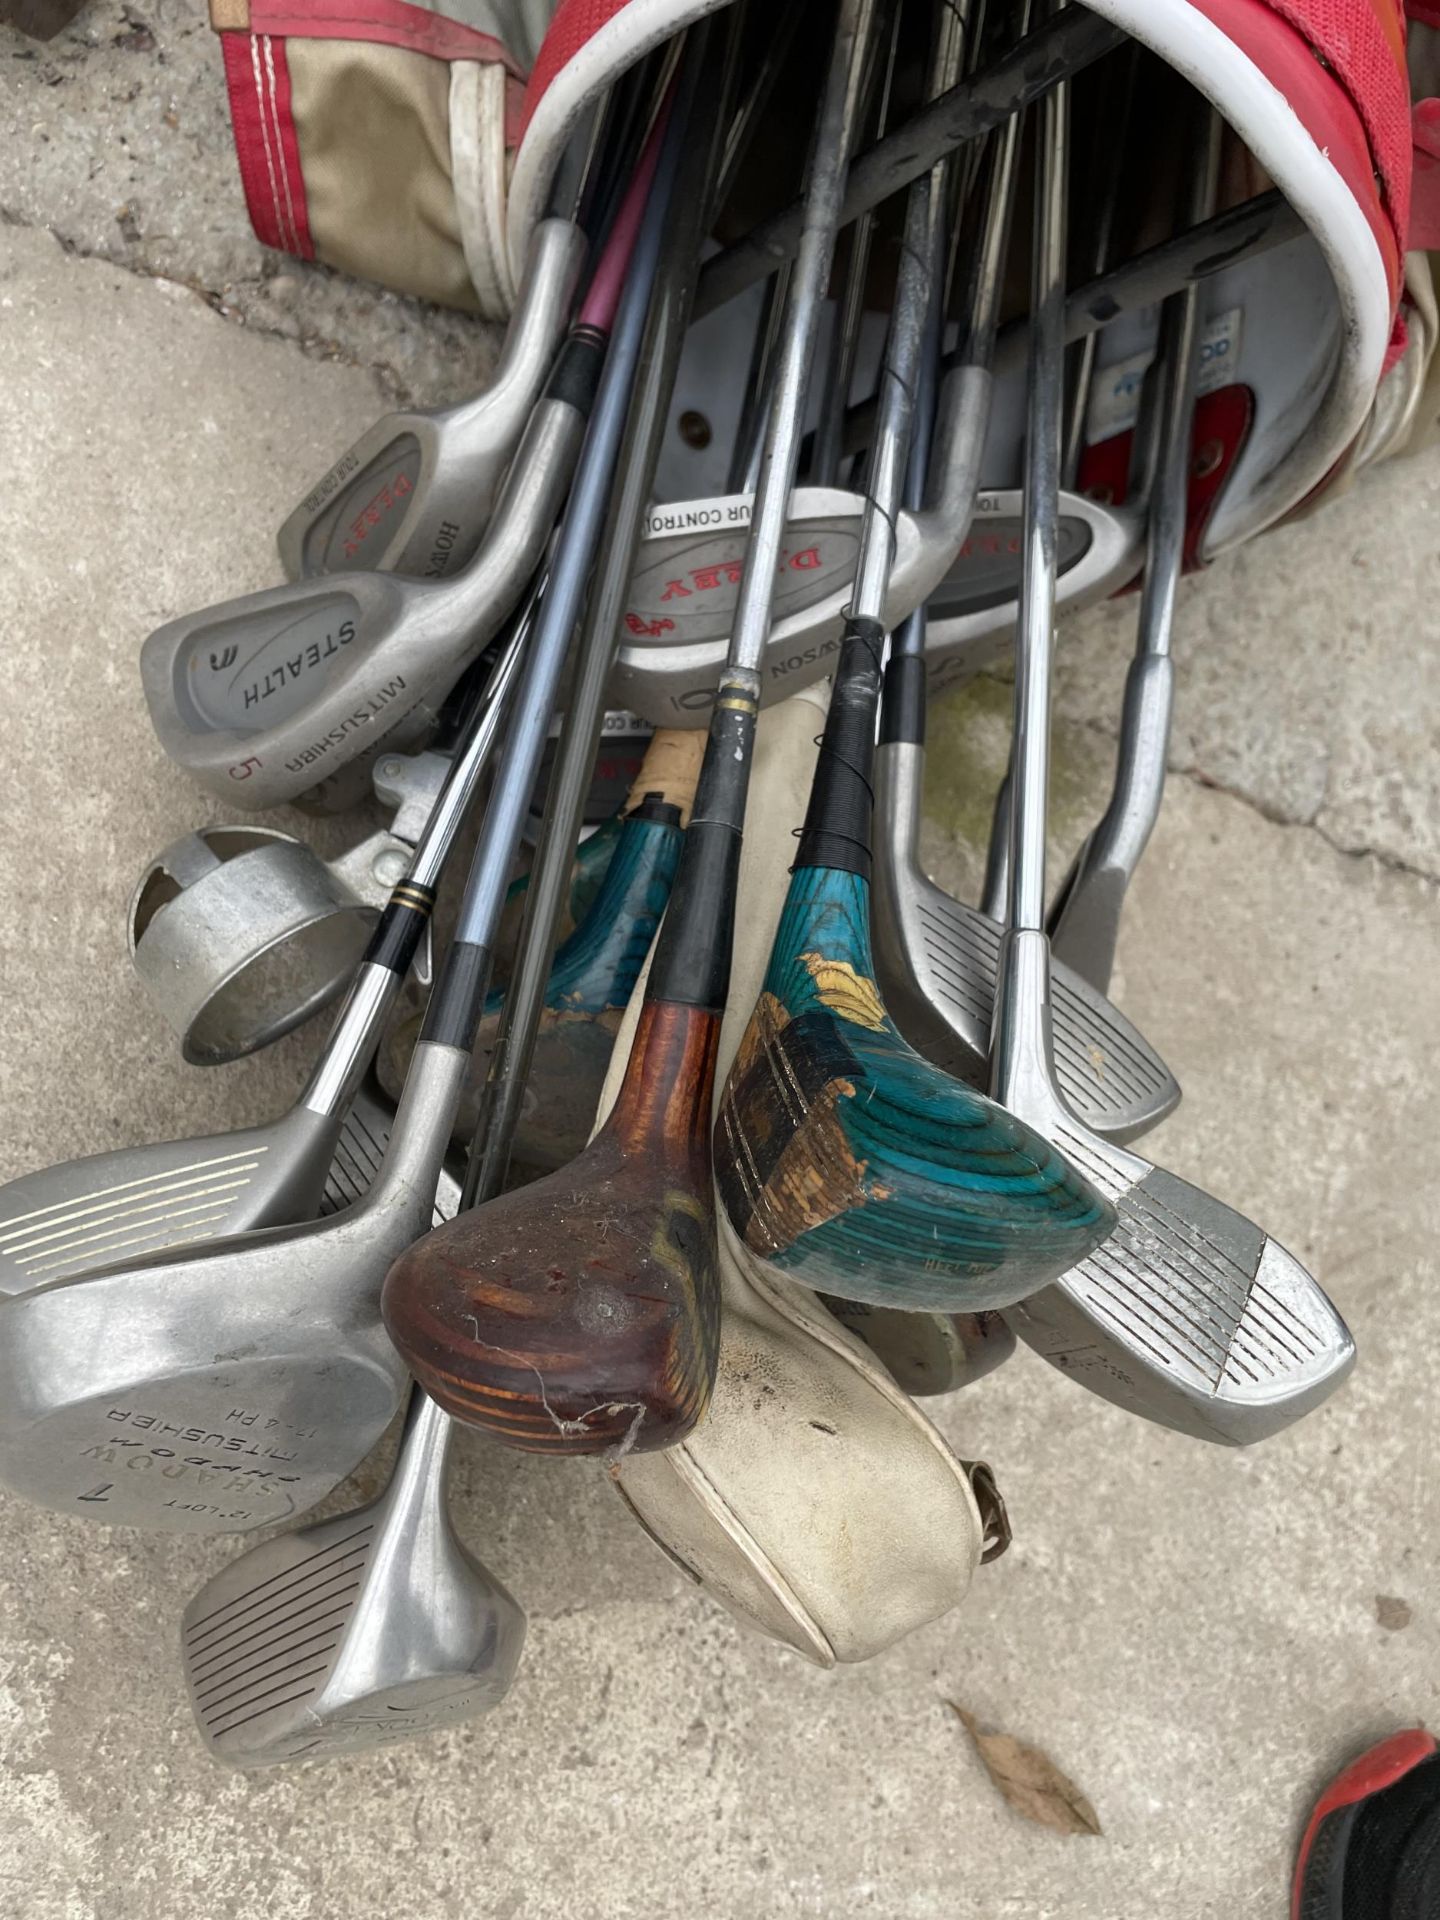 A VINTAGE GOLF BAG WITH AN ASSORTMENT OF VINTAGE GOLF CLUBS - Image 3 of 3